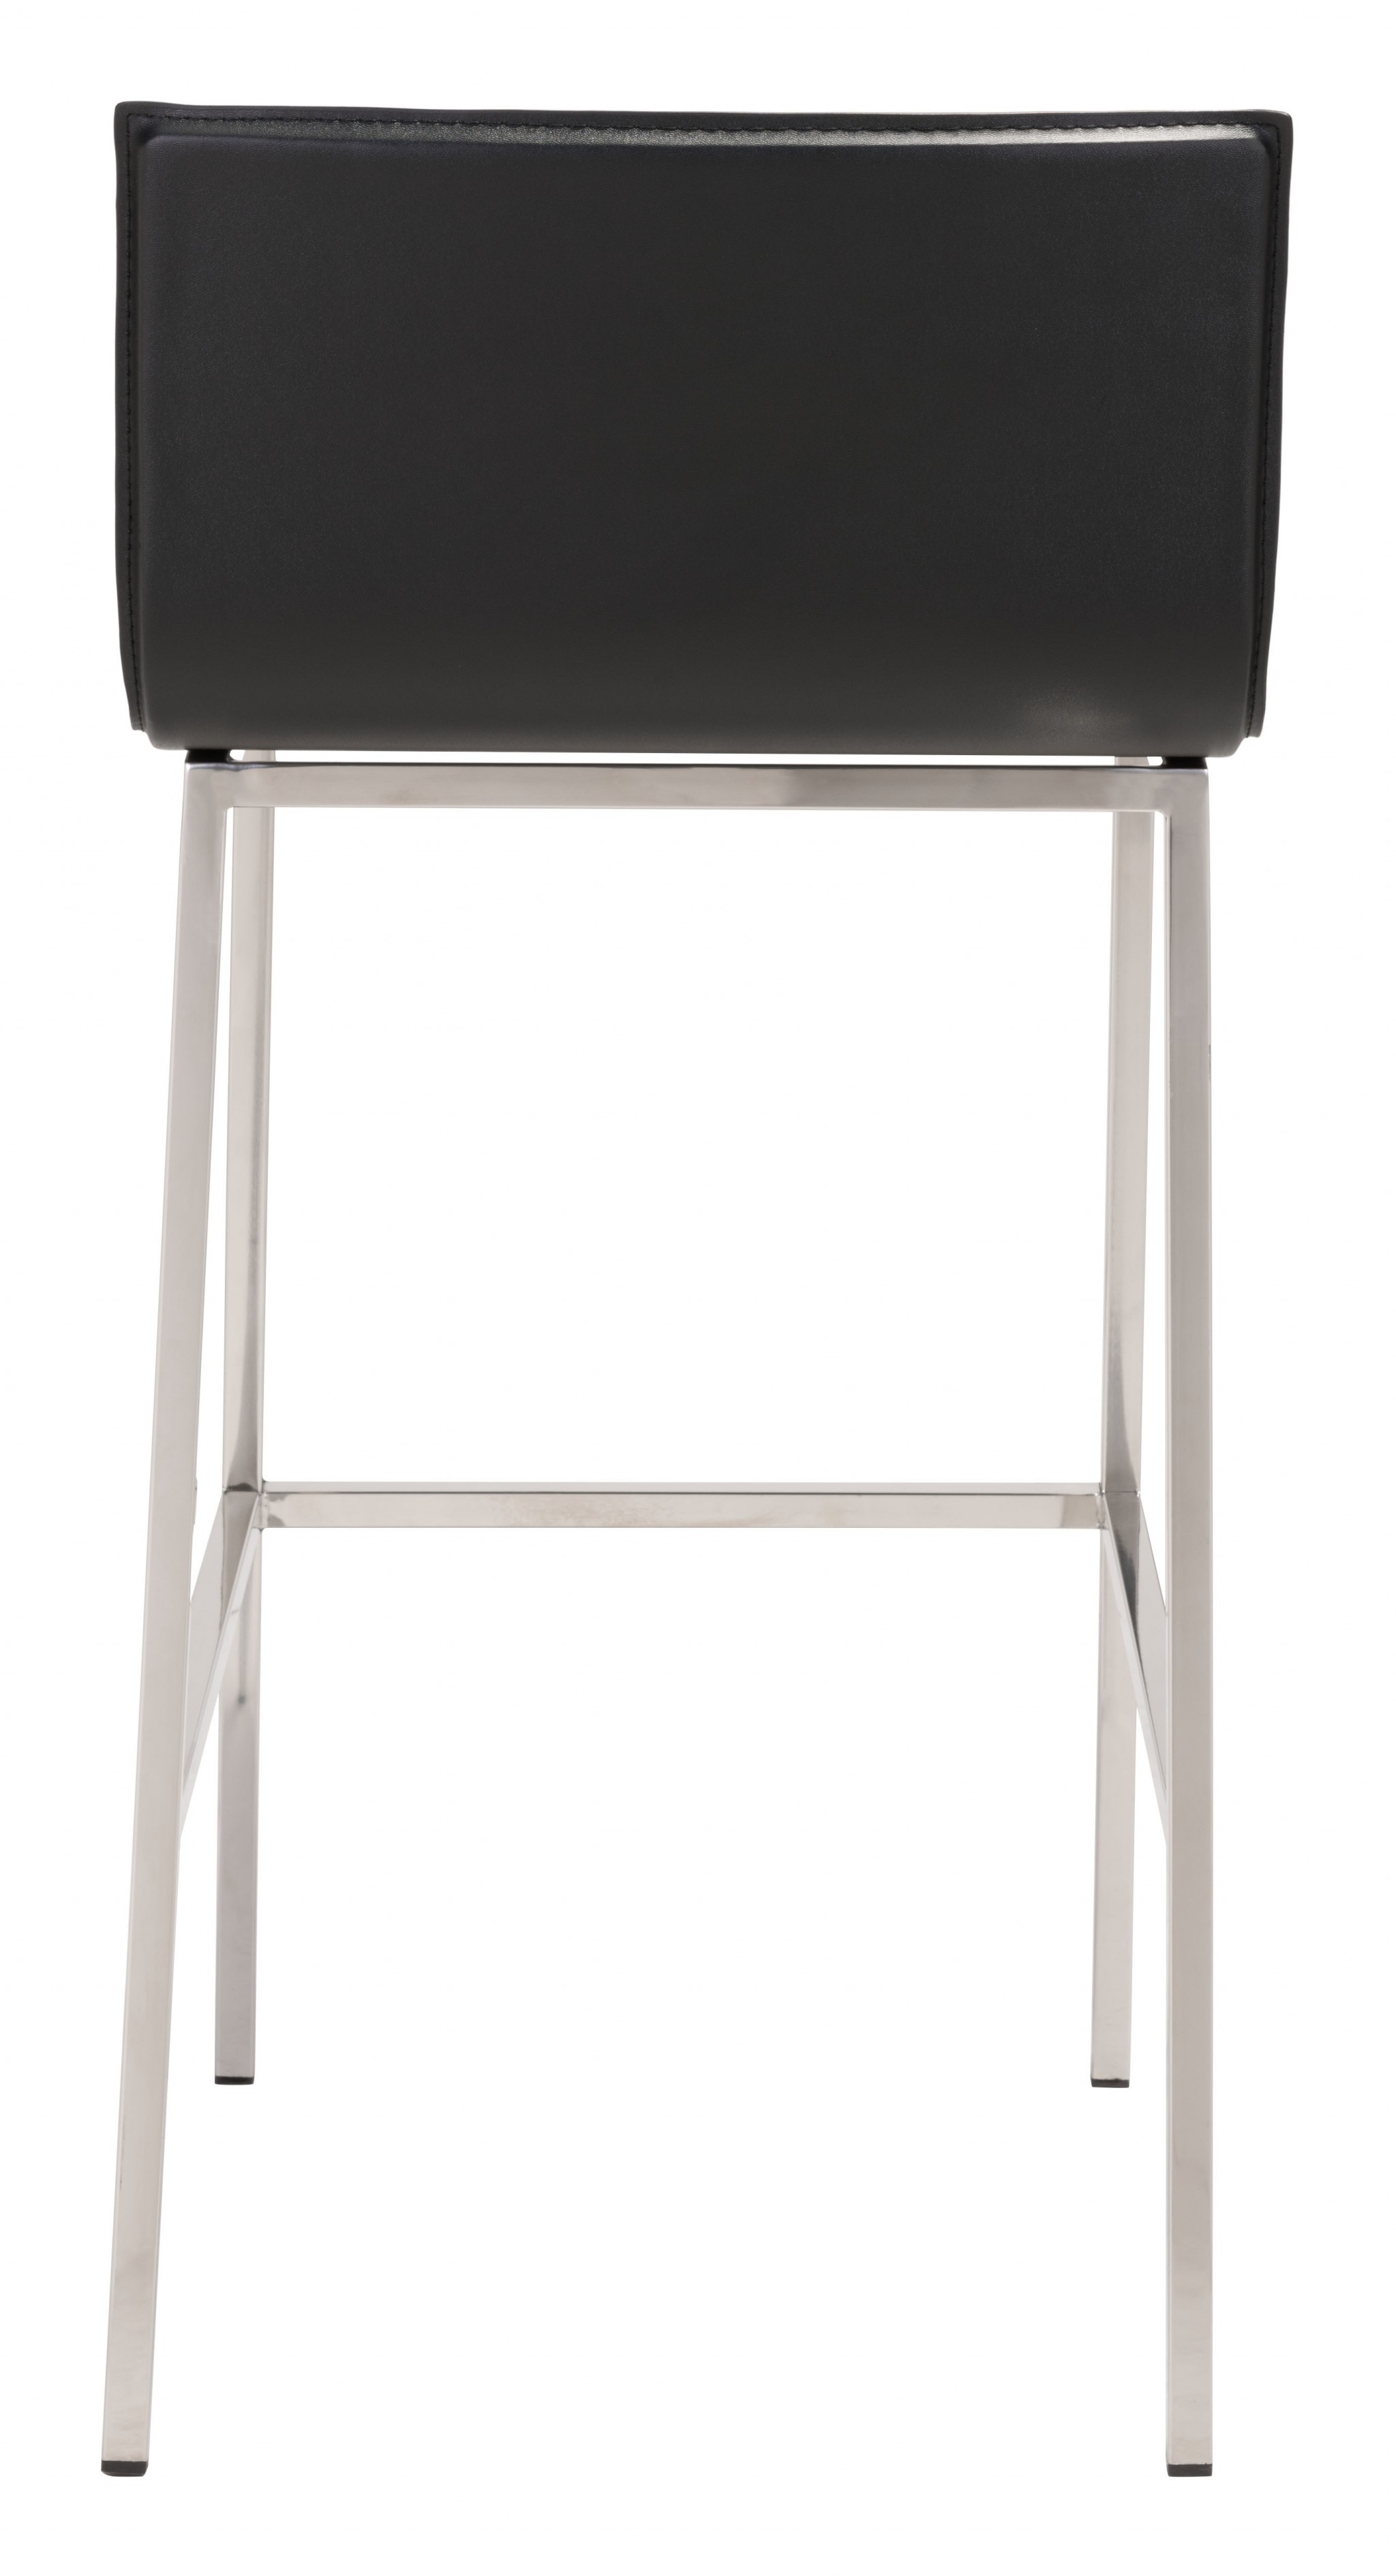 Set of Two Designer Black Faux Leather and Steel Barstools